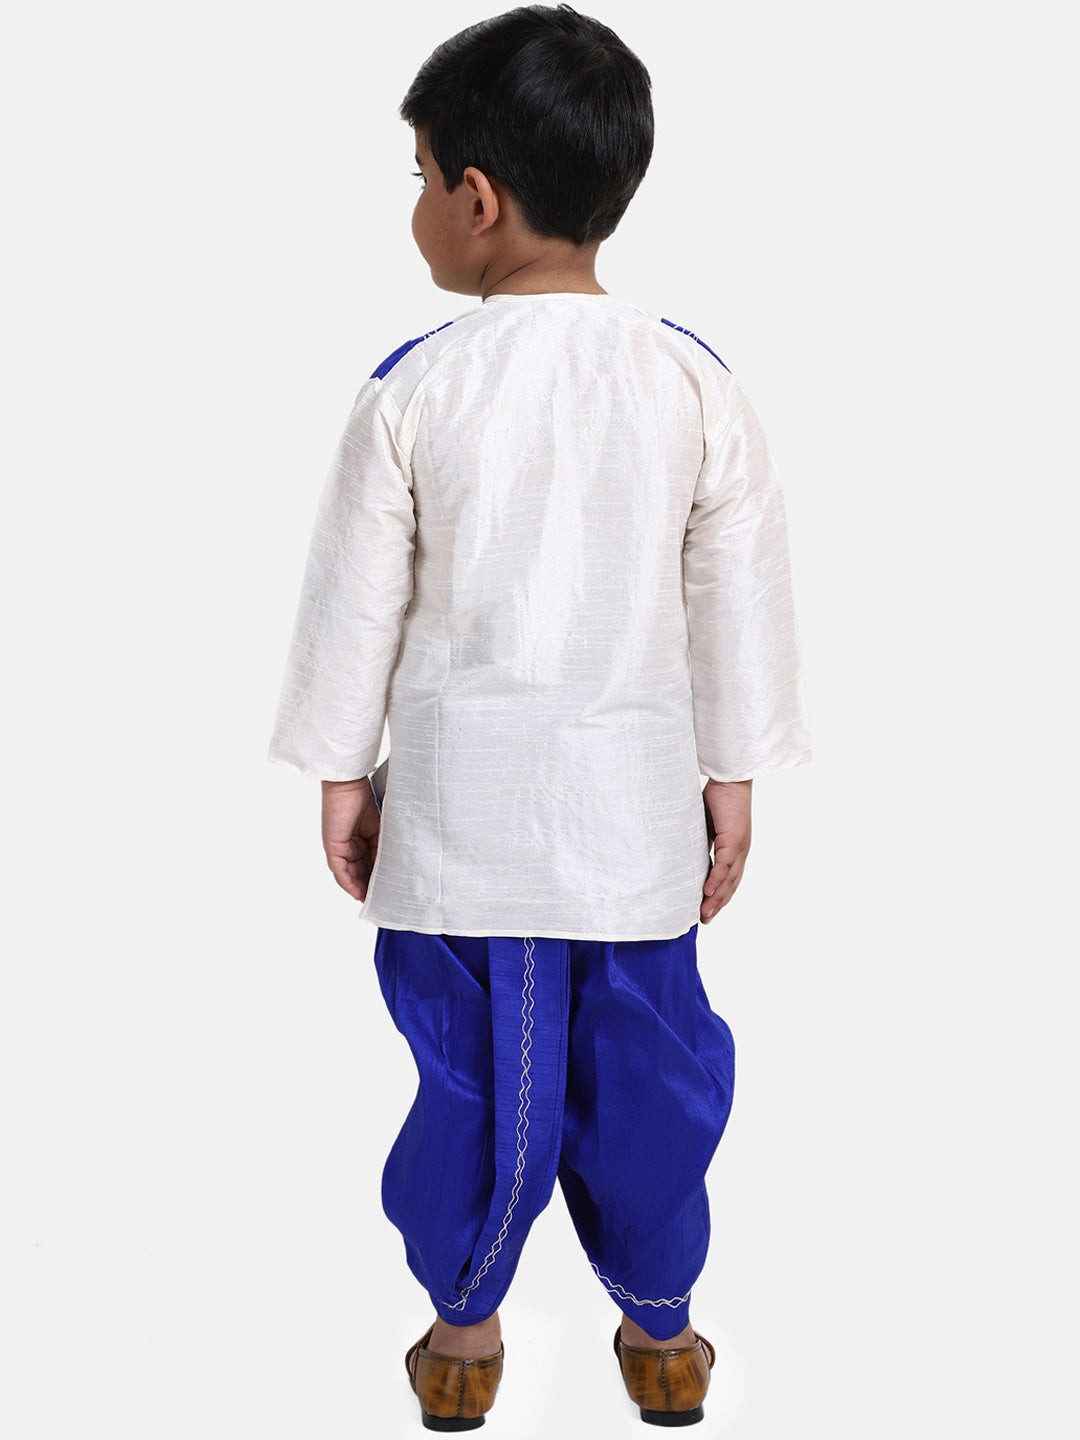 BownBee Embroidery Neckline Full Sleeves Kurta With Attached Jacket & Dhoti - White & Blue